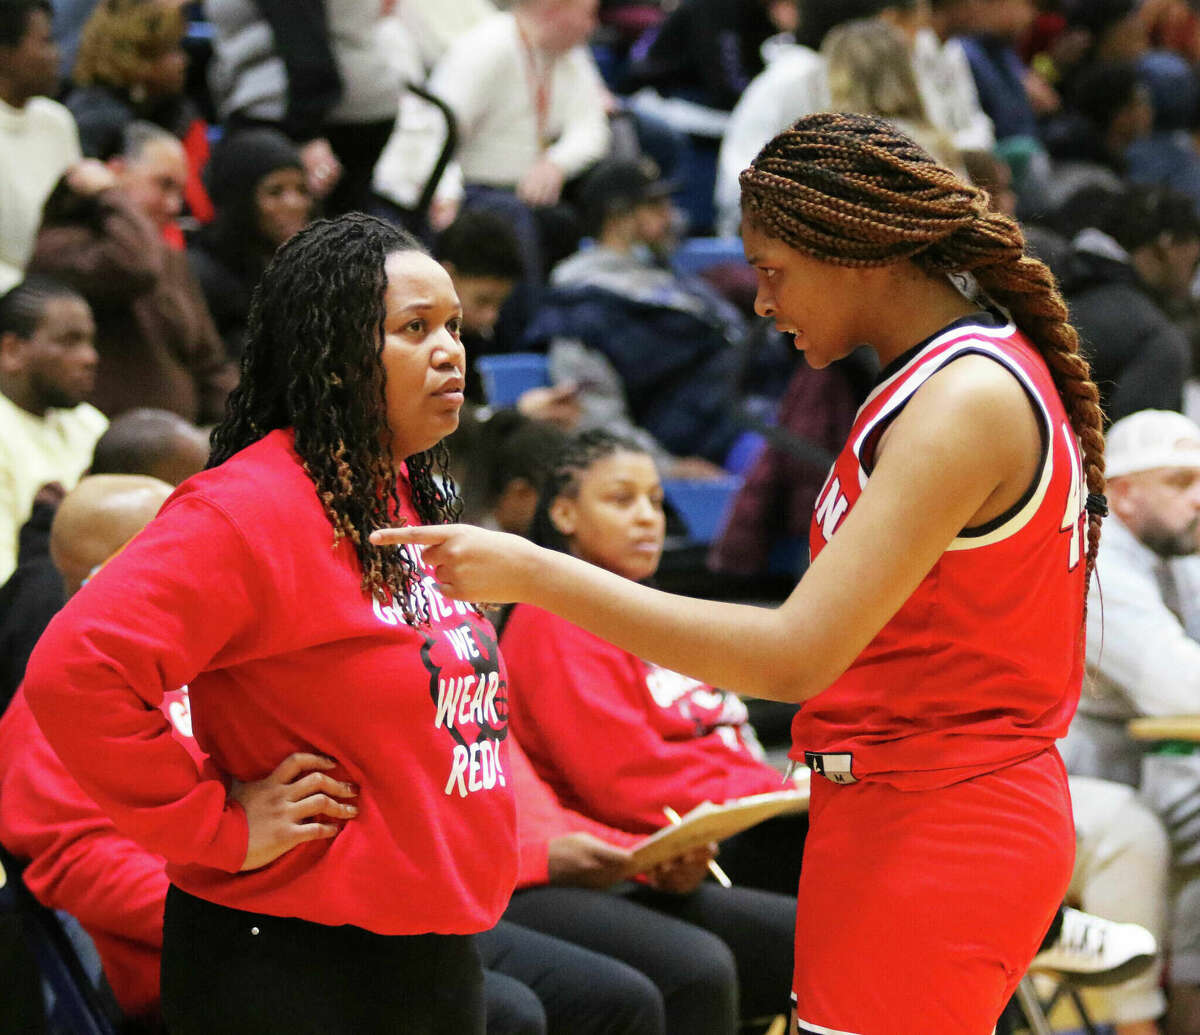 Alton's Jarius Powers (right) and AHS coach Deserea Howard talk at halftime of last week's game at O'Fallon. Alton is ranked No. 4 in this week's AP Class 4A Girls State Basketball Poll.